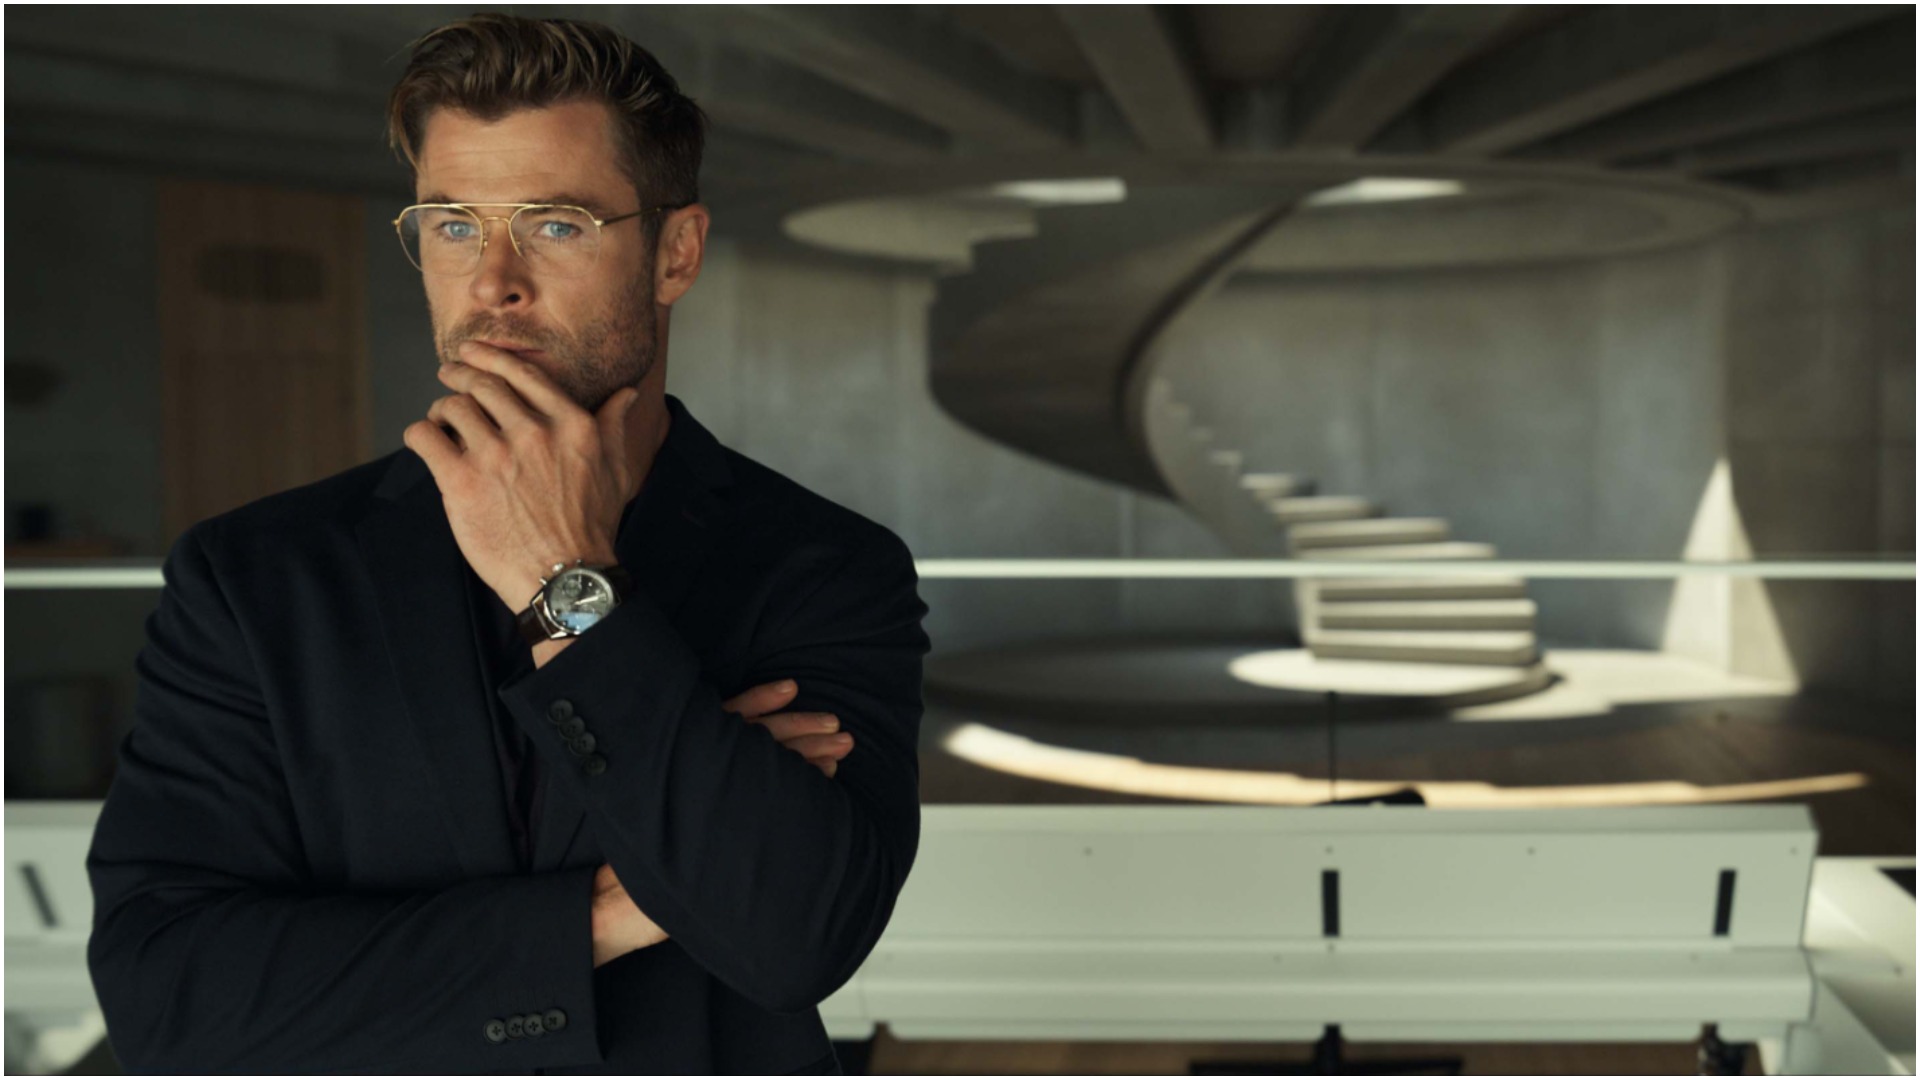 Chris Hemsworth’s new Netflix movie gets first reviews – and they’re seriously mixed